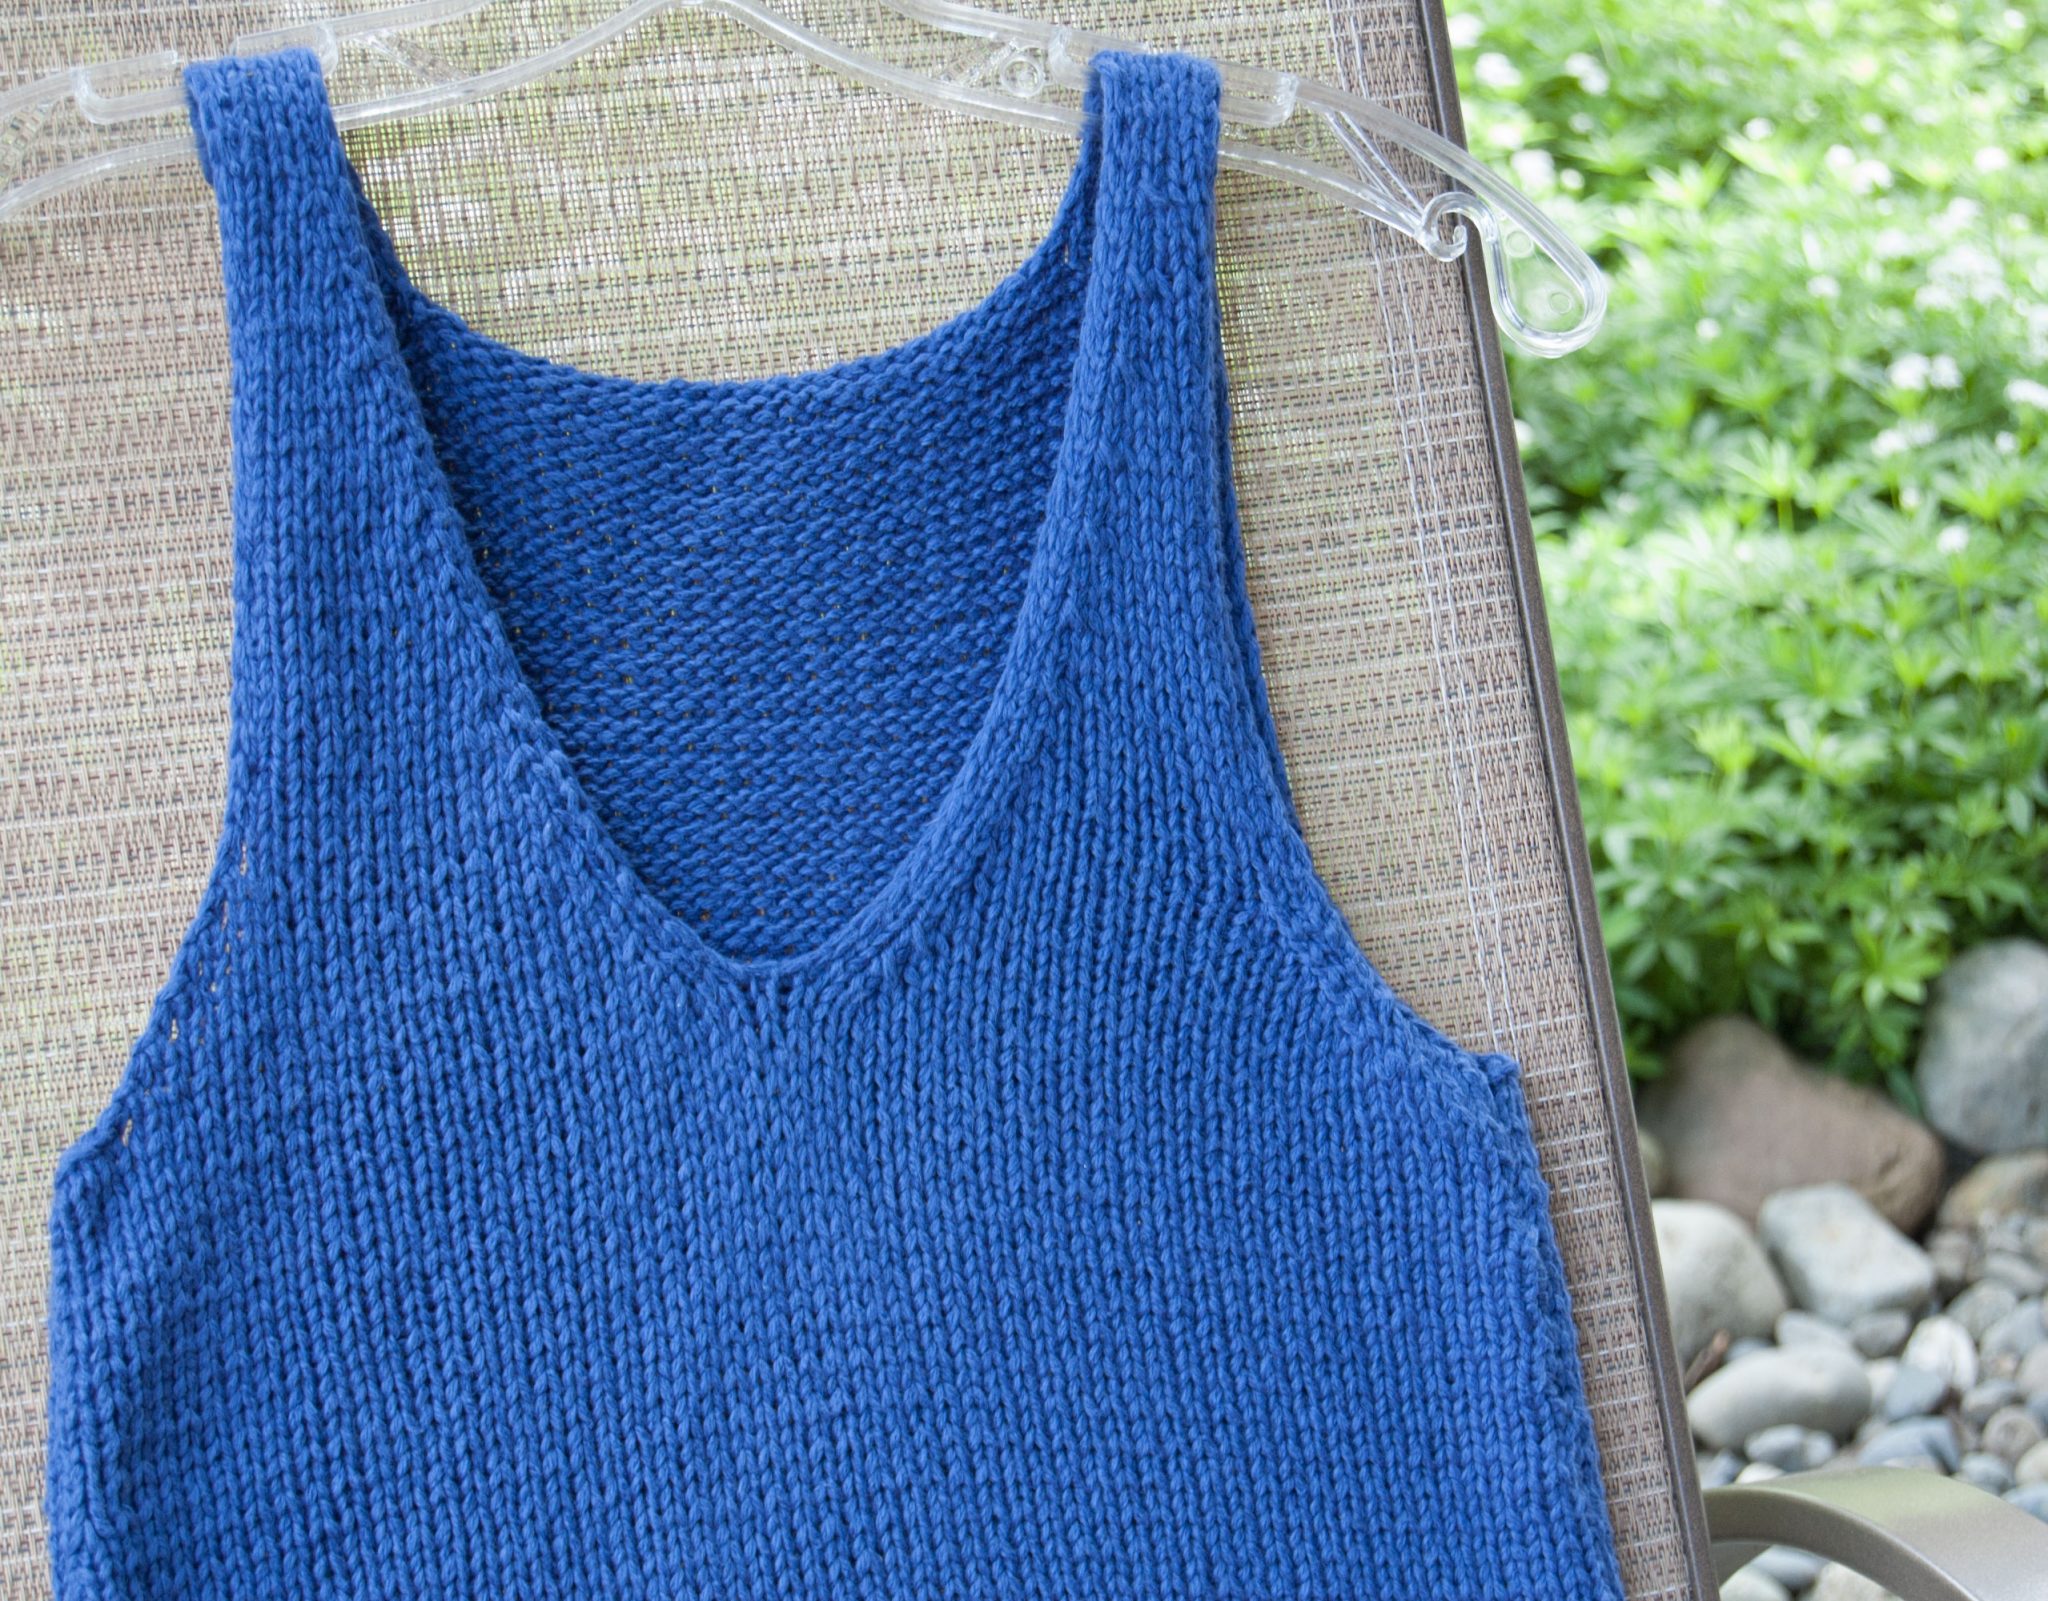 KNITTING PATTERN Emerald Knitted Tank Top Pattern Knitted Top